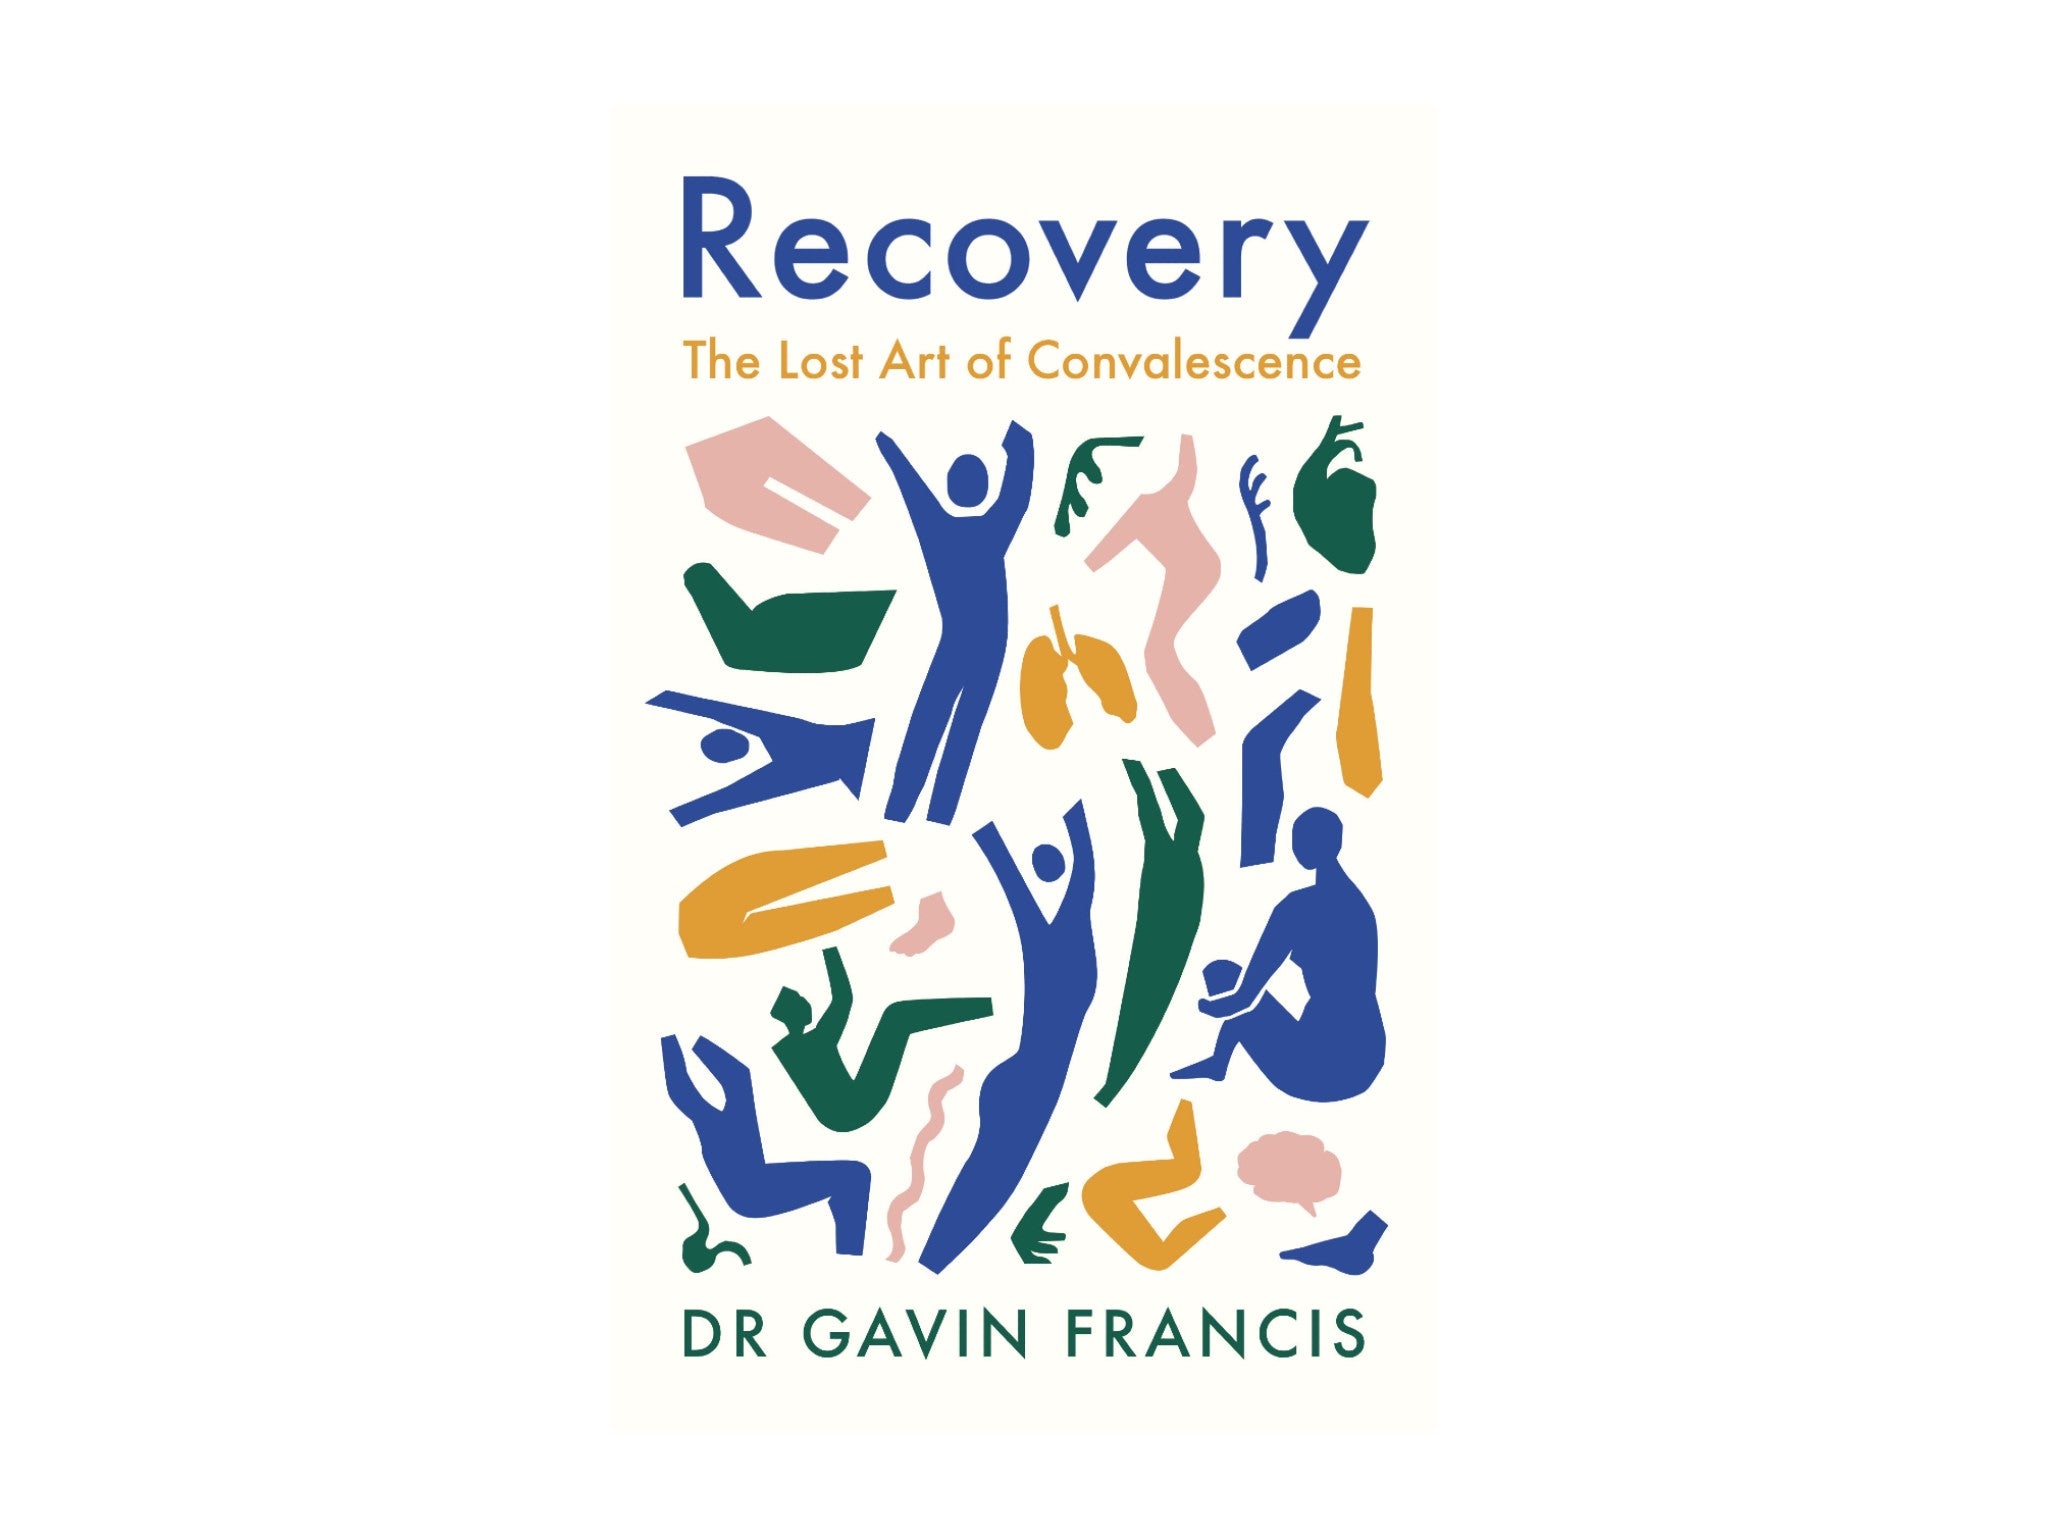 ‘Recovery’ by Gavin Francis indybest.jpg